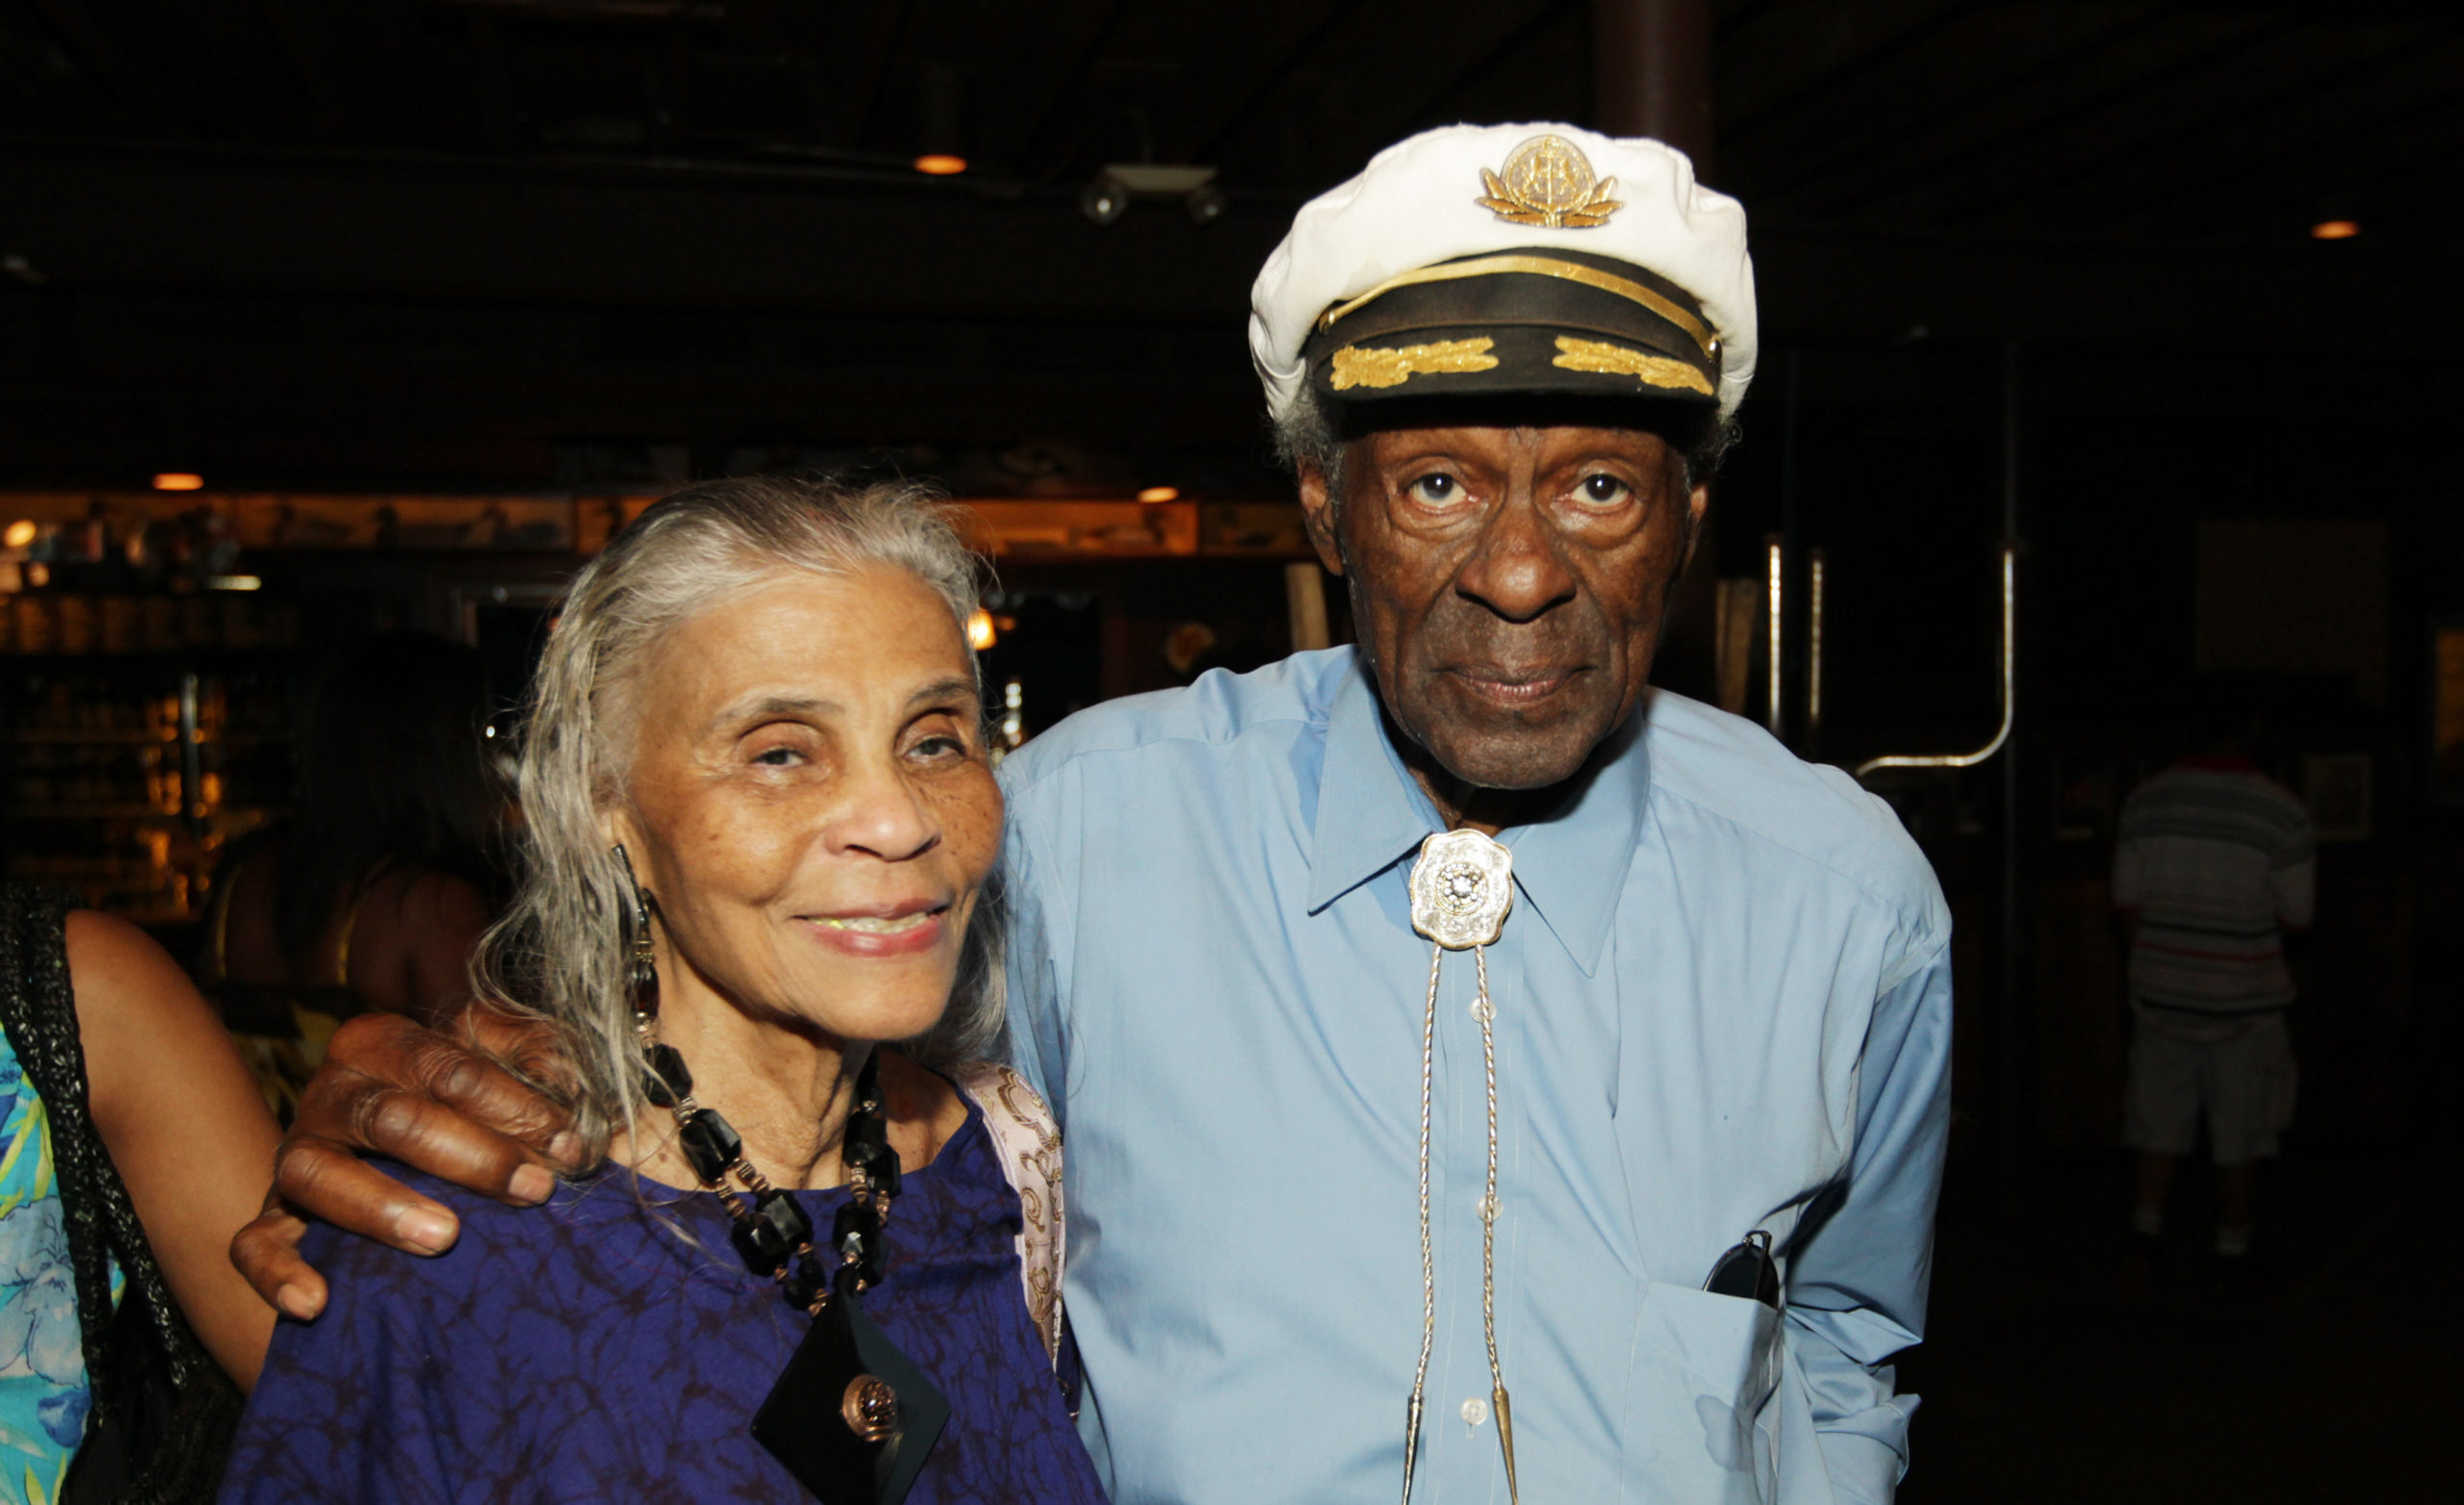 Chuck Berry Unfortunately Died In 2017 And left behind 4 children and his Wife Themetta!